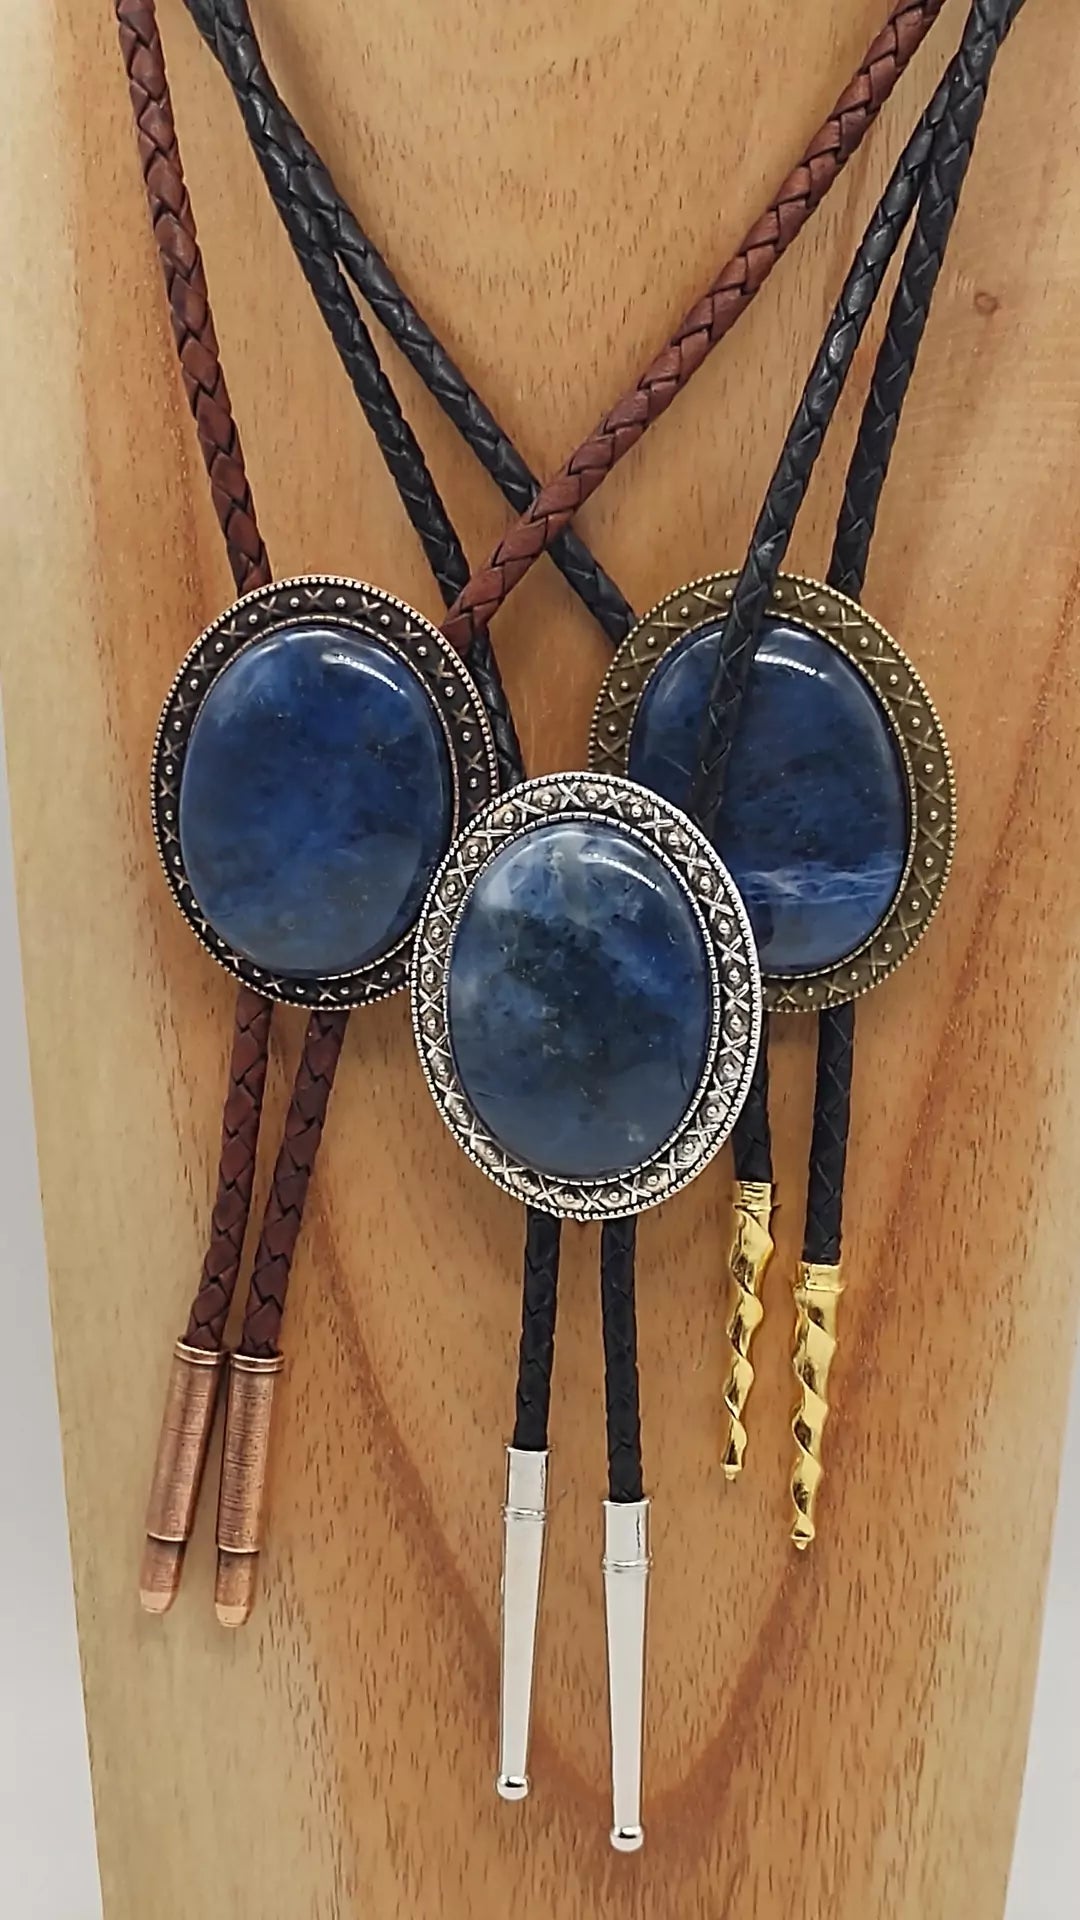 Yellowstone Bolo Tie with Blue Sodalite Stone in Gold, Silver or Copper Setting - Folks On The Edge